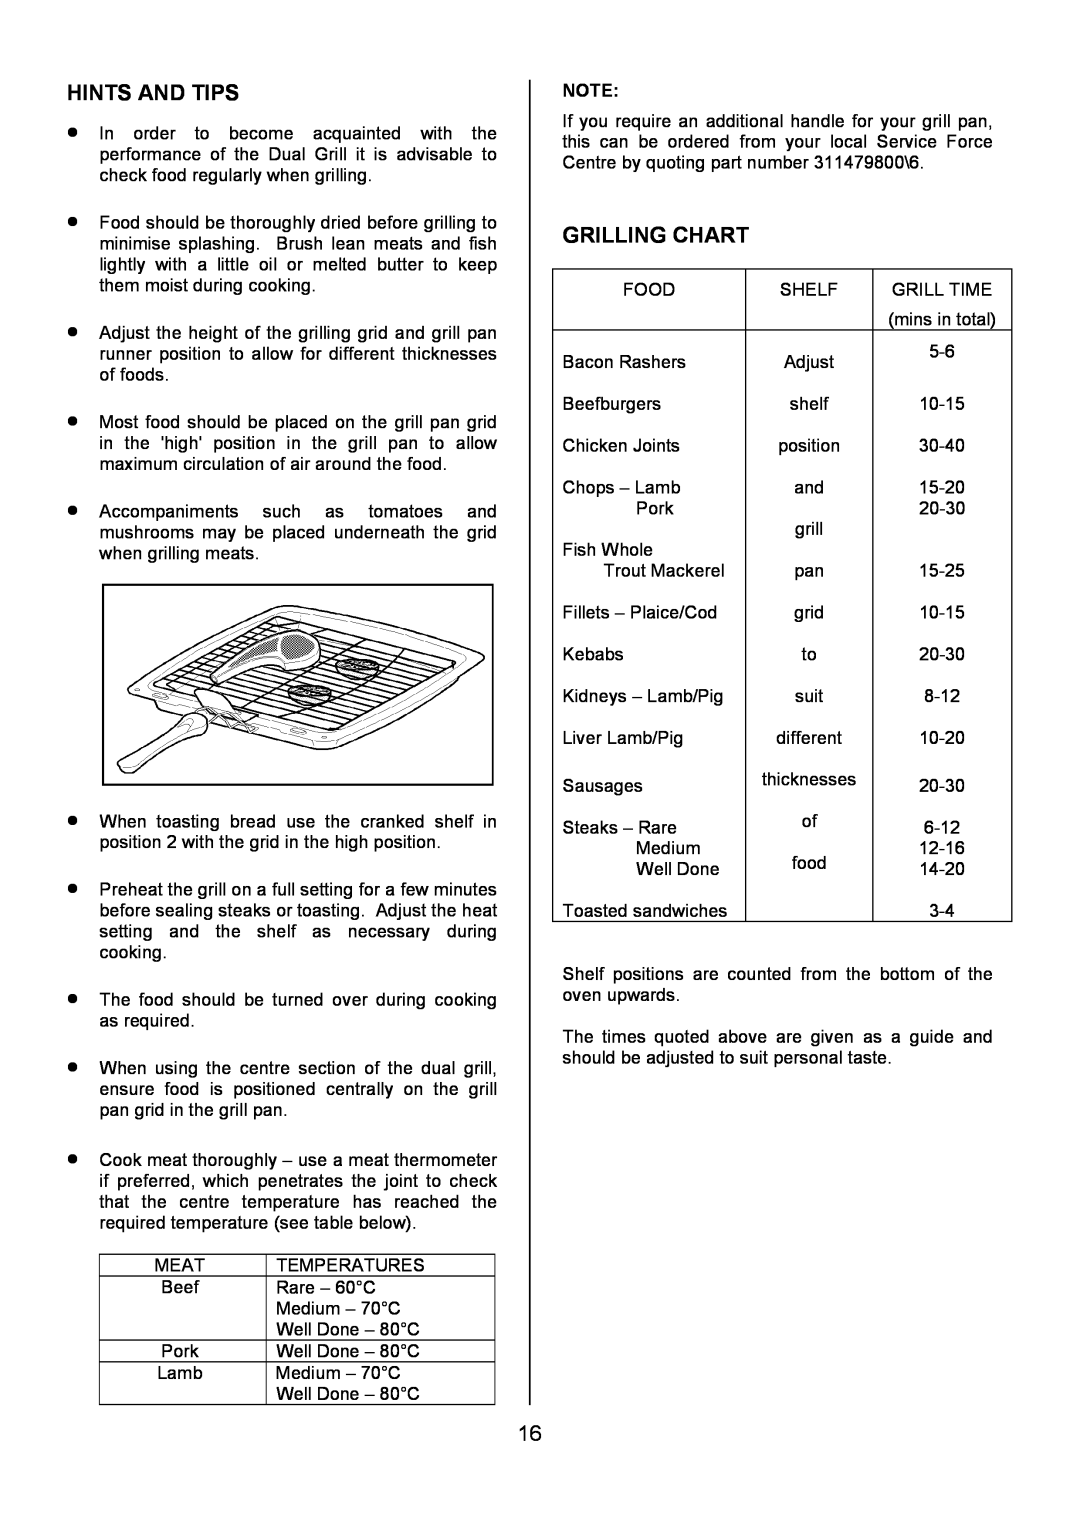 Electrolux EOD5310 manual Hints And Tips, Grilling Chart, thicknesses 